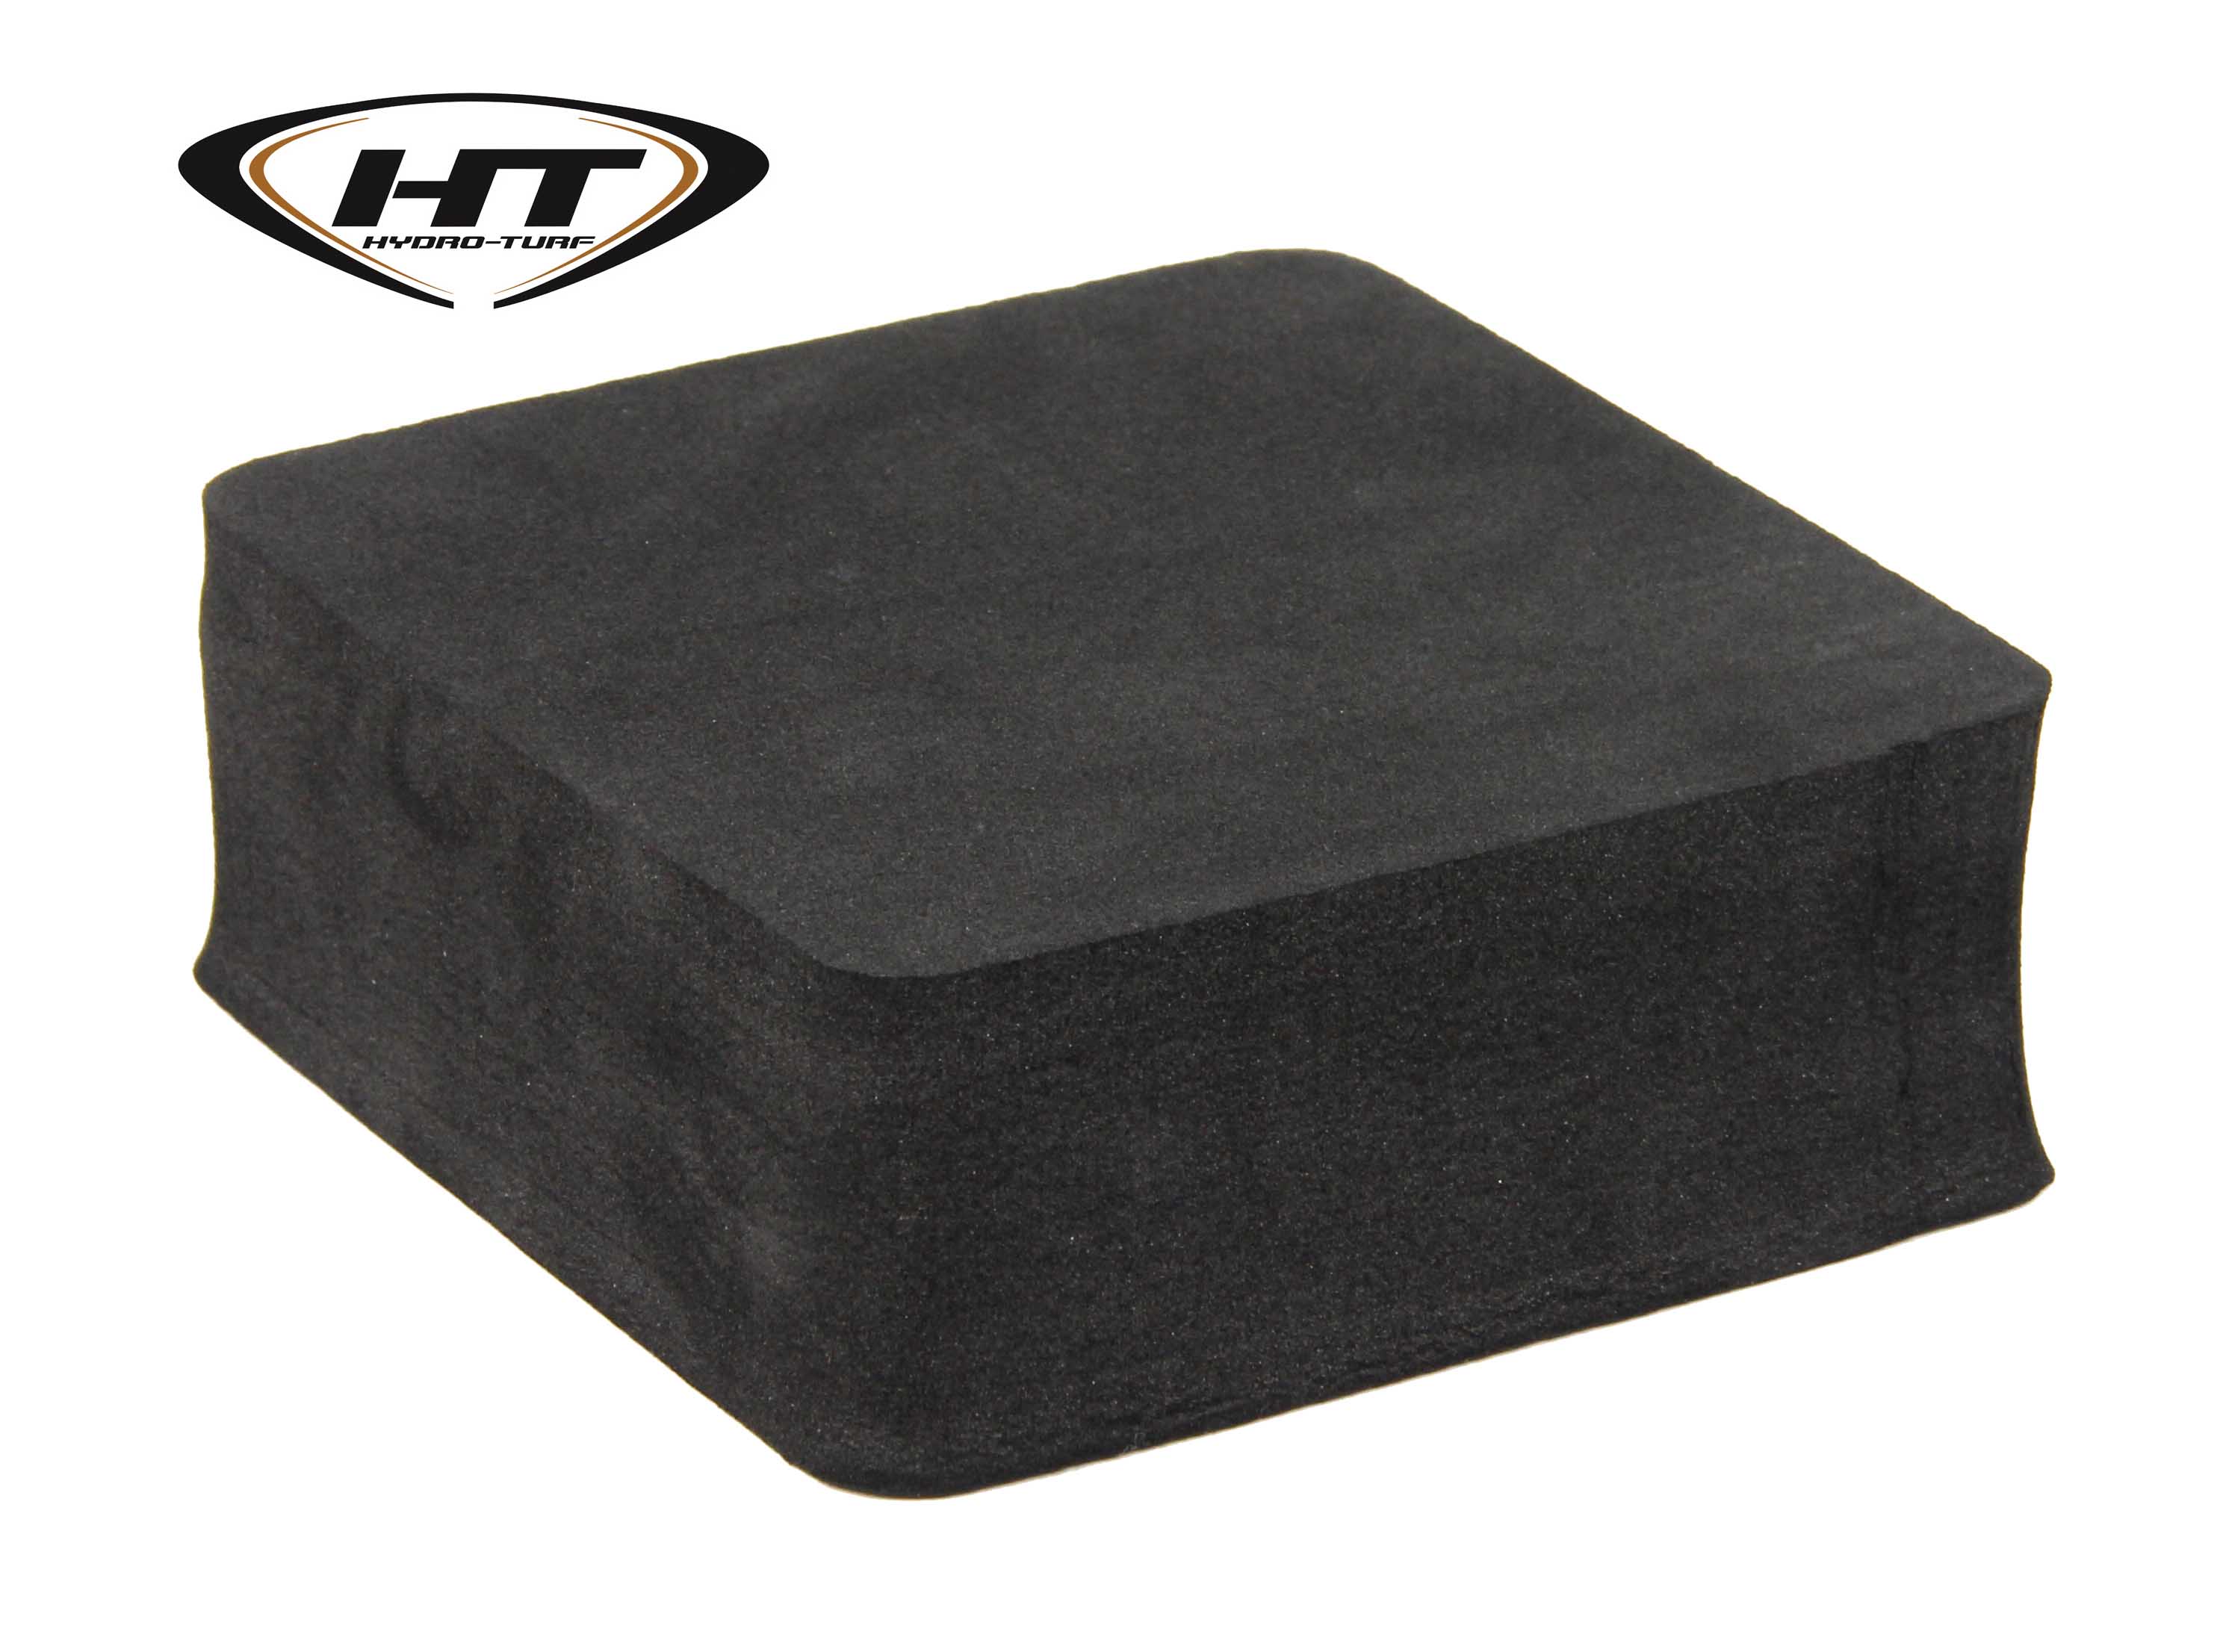 Hydro Turf 2" Mounting Block For Handle Pole Pads / Lifters, Footholds And Mounting Exhausts